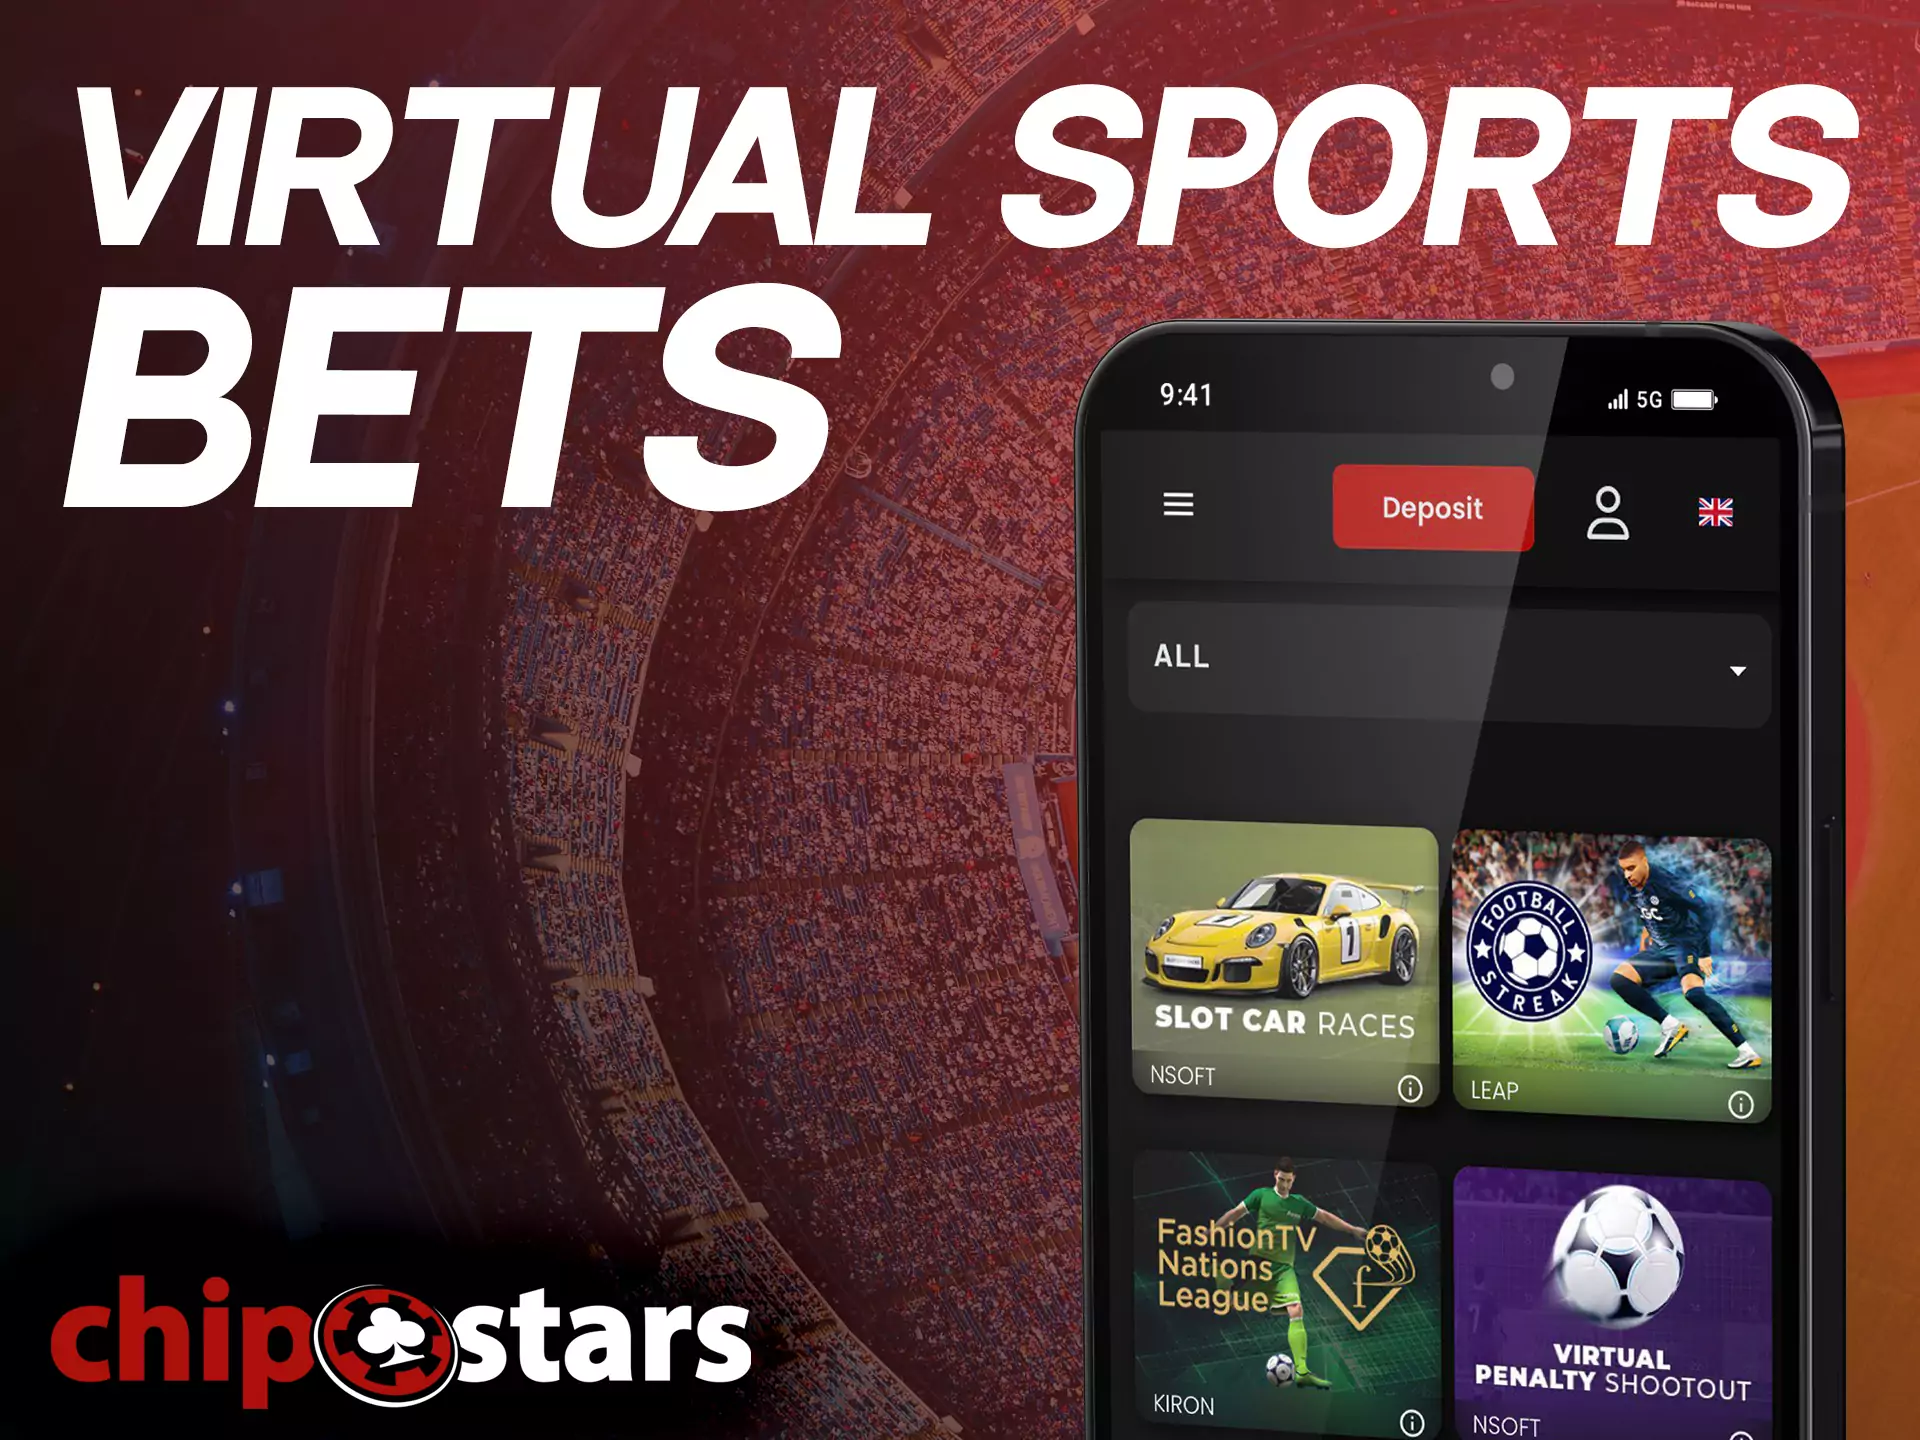 Besides traditional sports betting, users place bets on virtual sports matches.